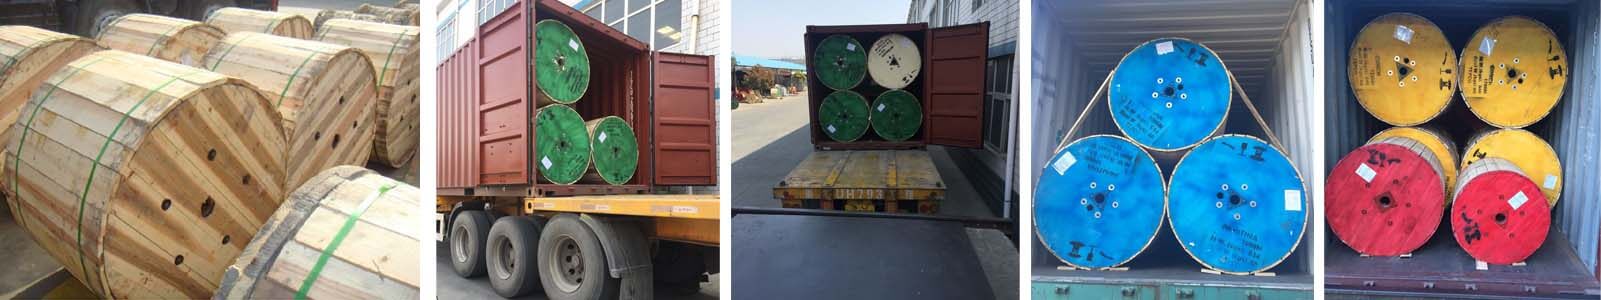 48 core optical fiber cable delivery